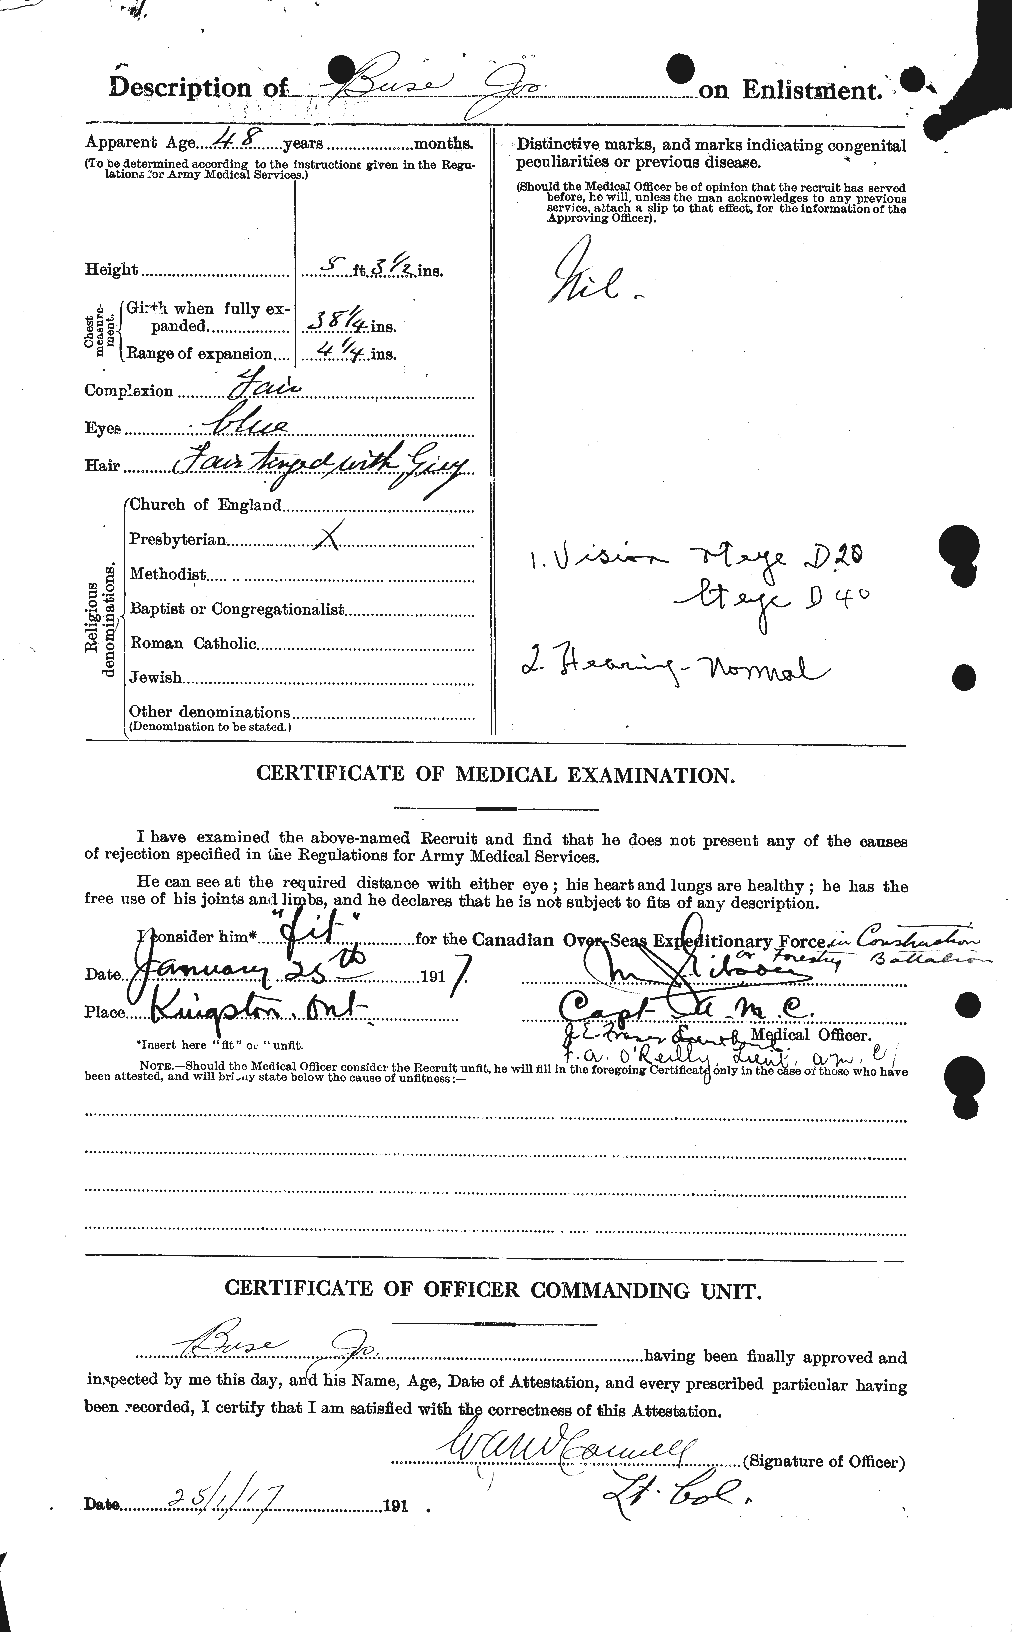 Personnel Records of the First World War - CEF 274312b